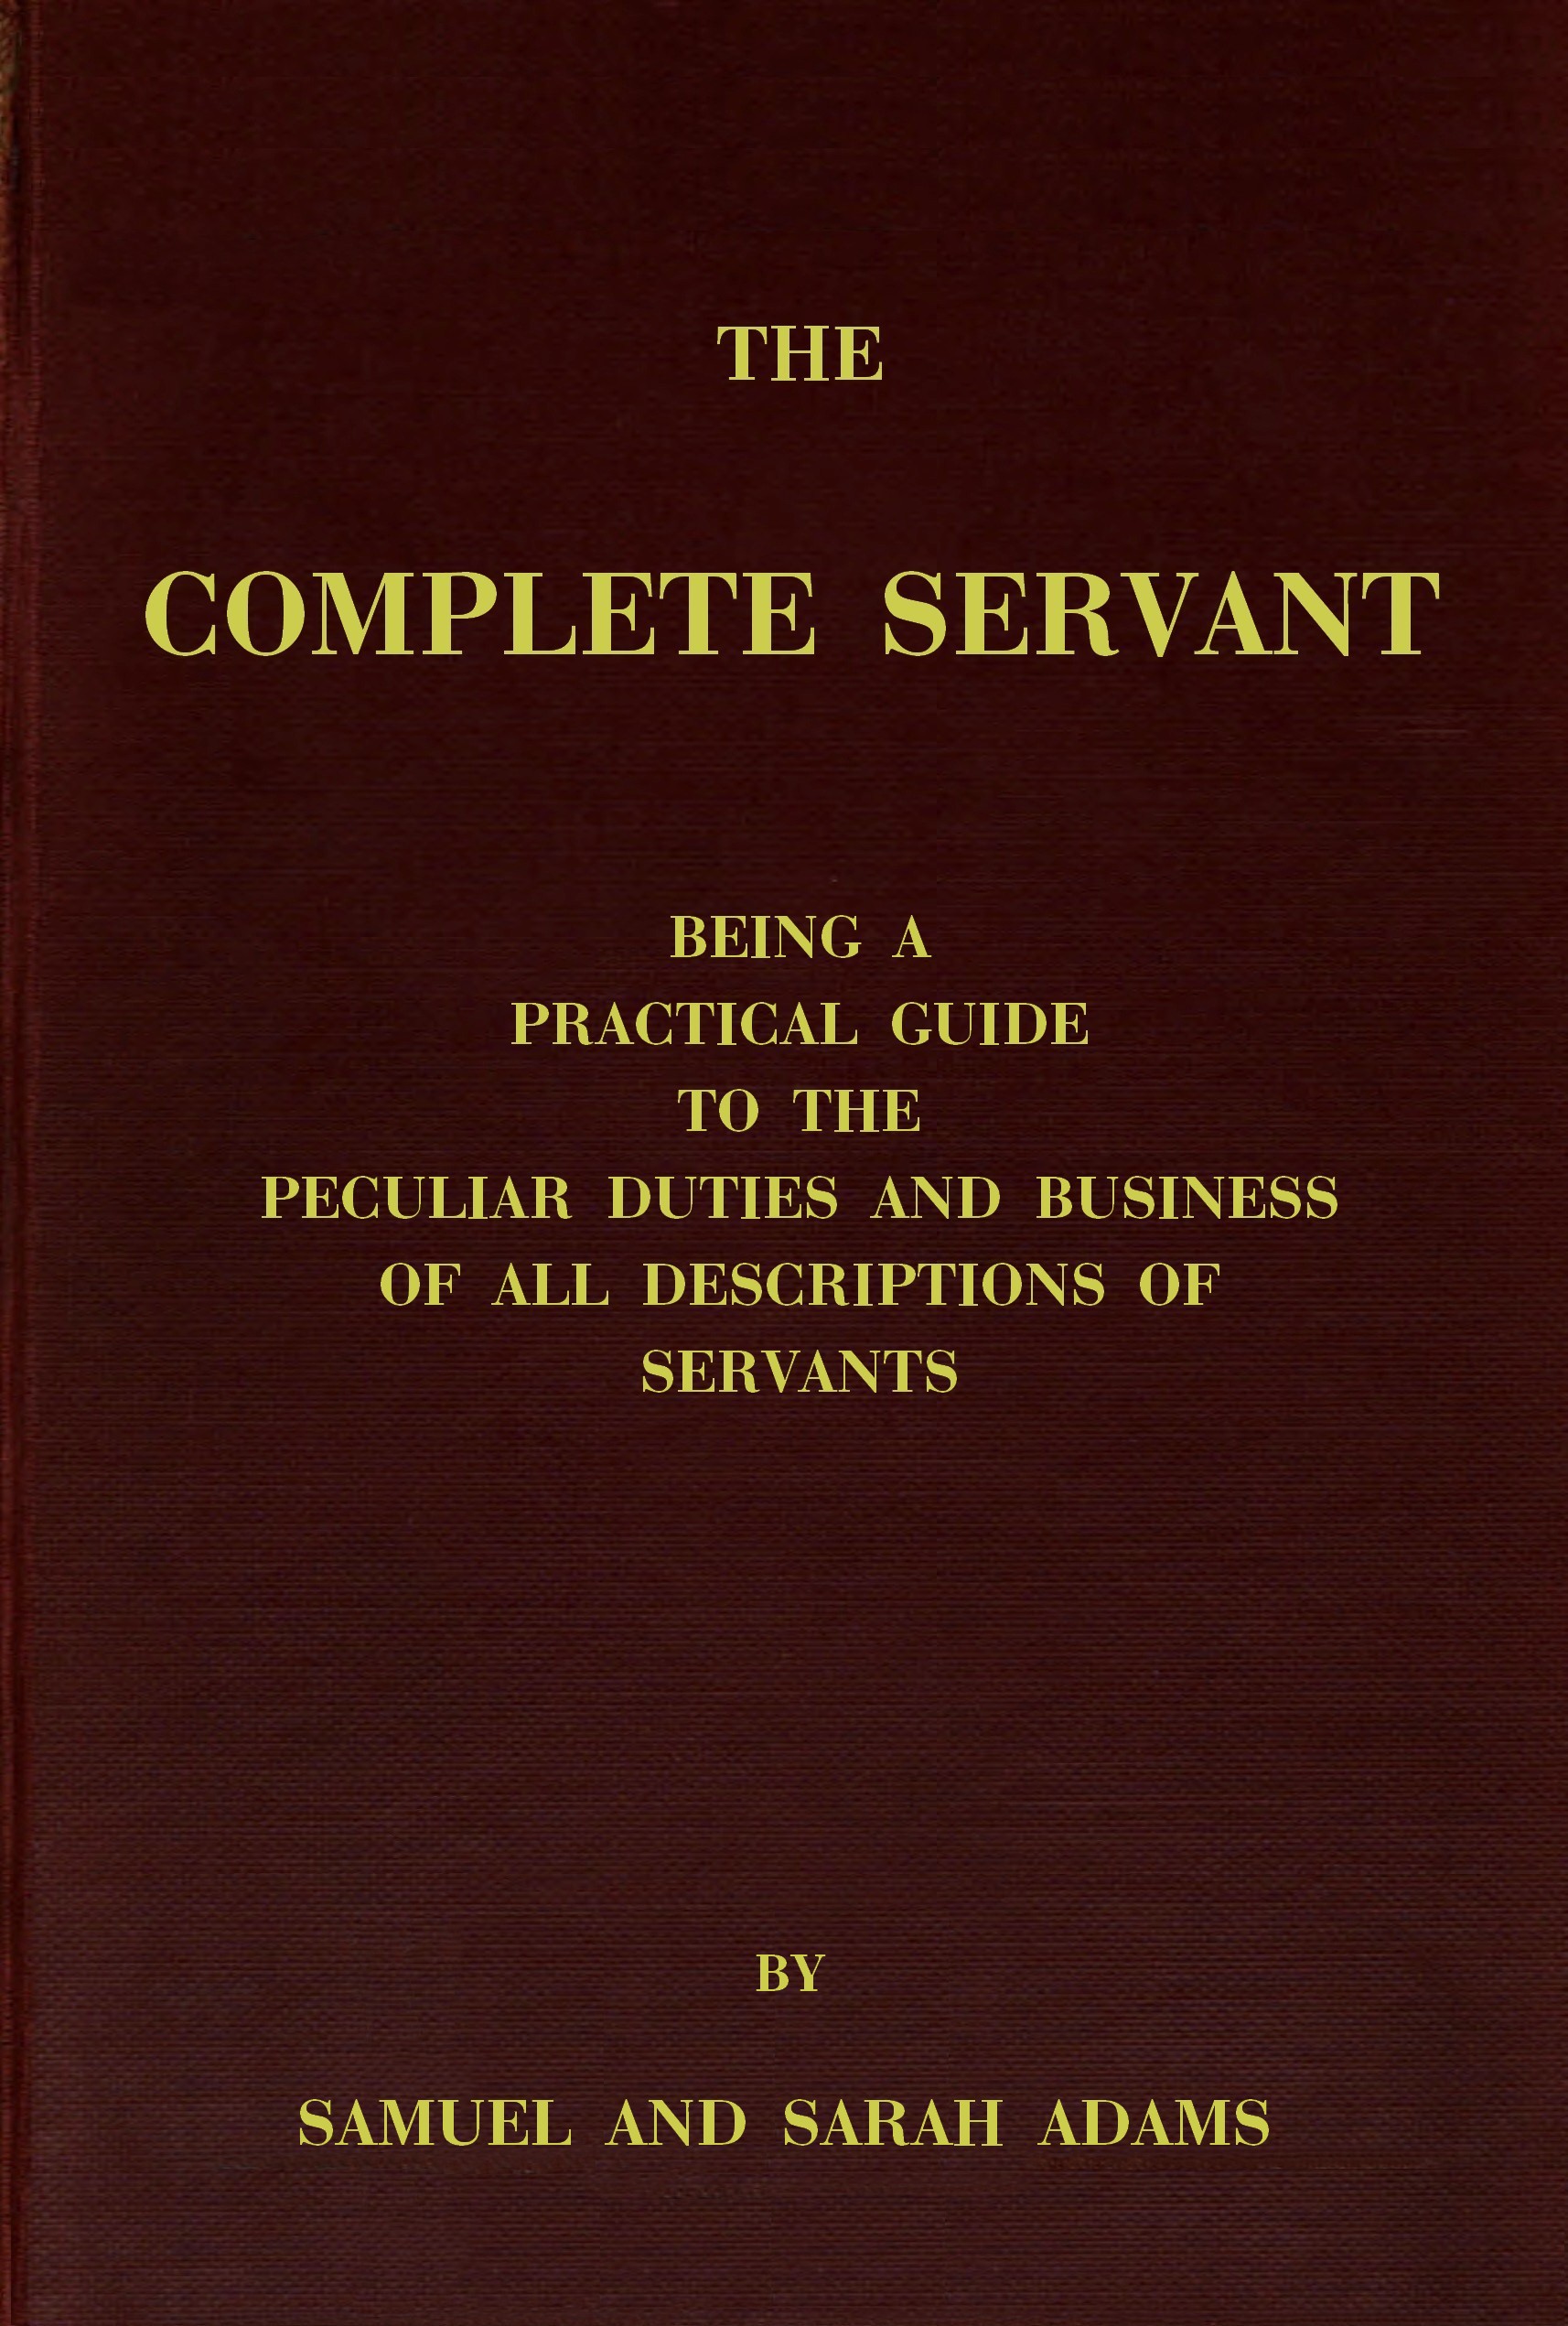 The complete servant&#10;Being a practical guide to the peculiar duties and business of all descriptions of servants, from the housekeeper to the servant of all-work, and from the land steward to the foot-boy. With useful receipts and tables